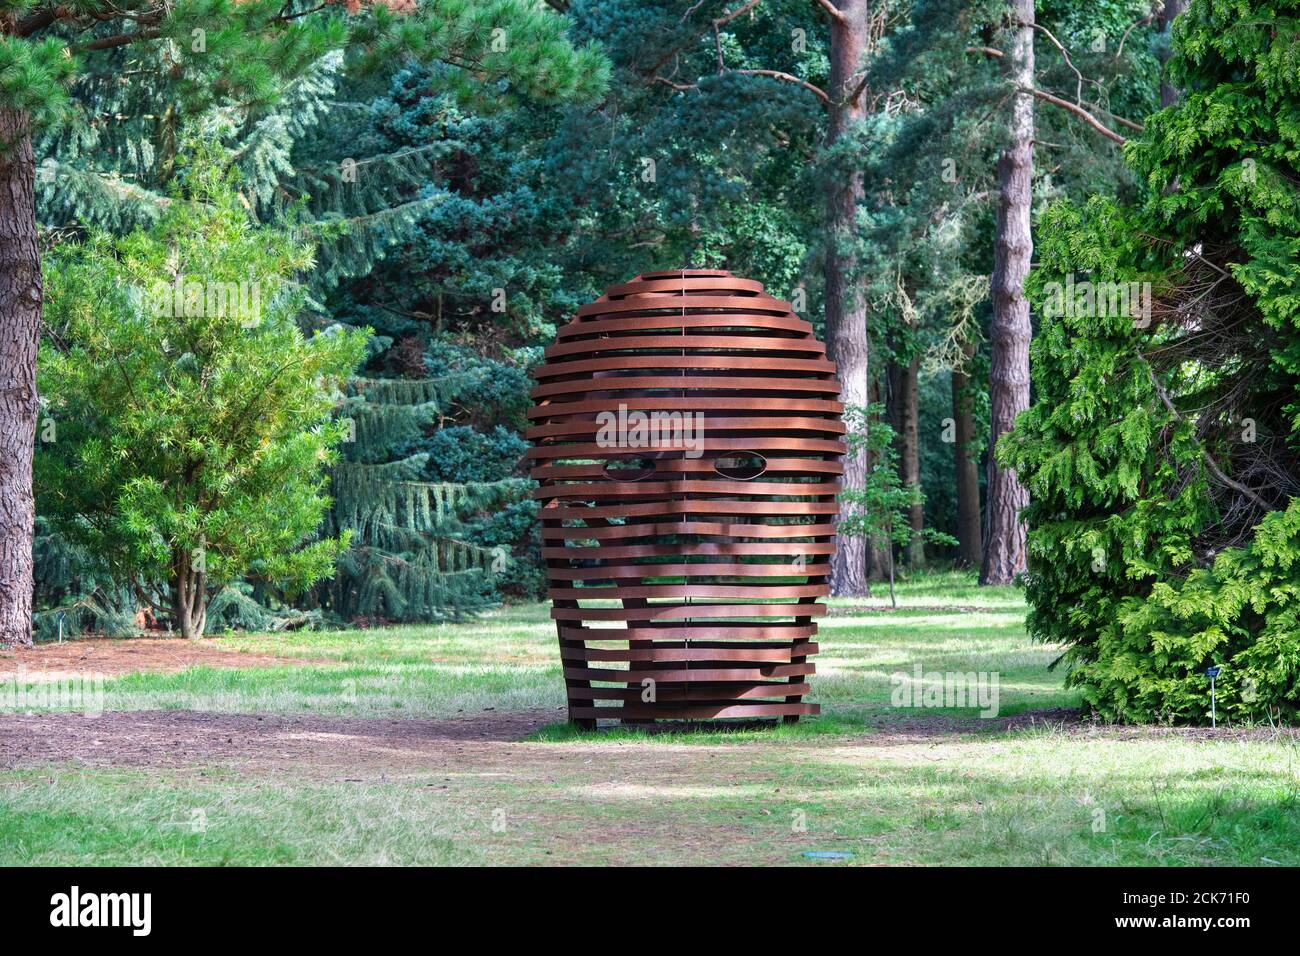 Metal head sculpture in the pinetum at RHS Wisley Gardens, Surrey, England Stock Photo